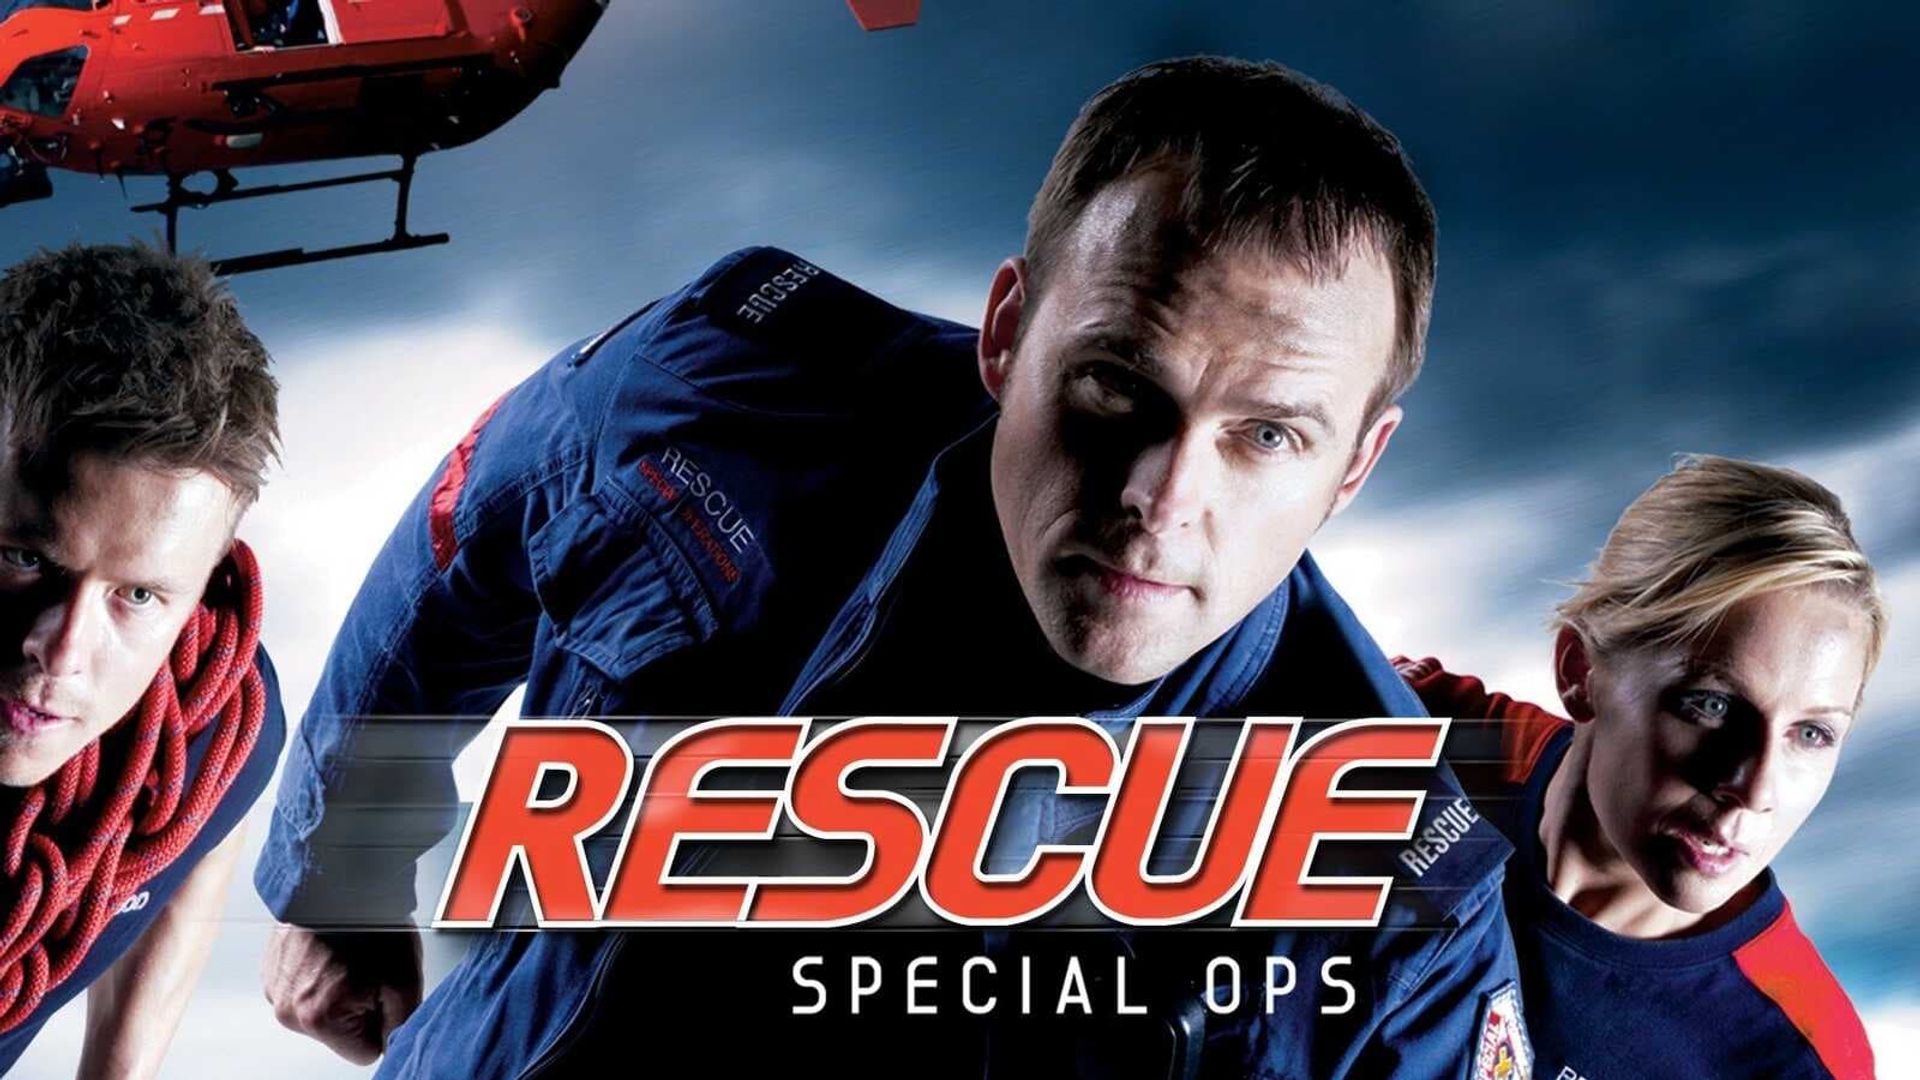 Rescue Special Ops background